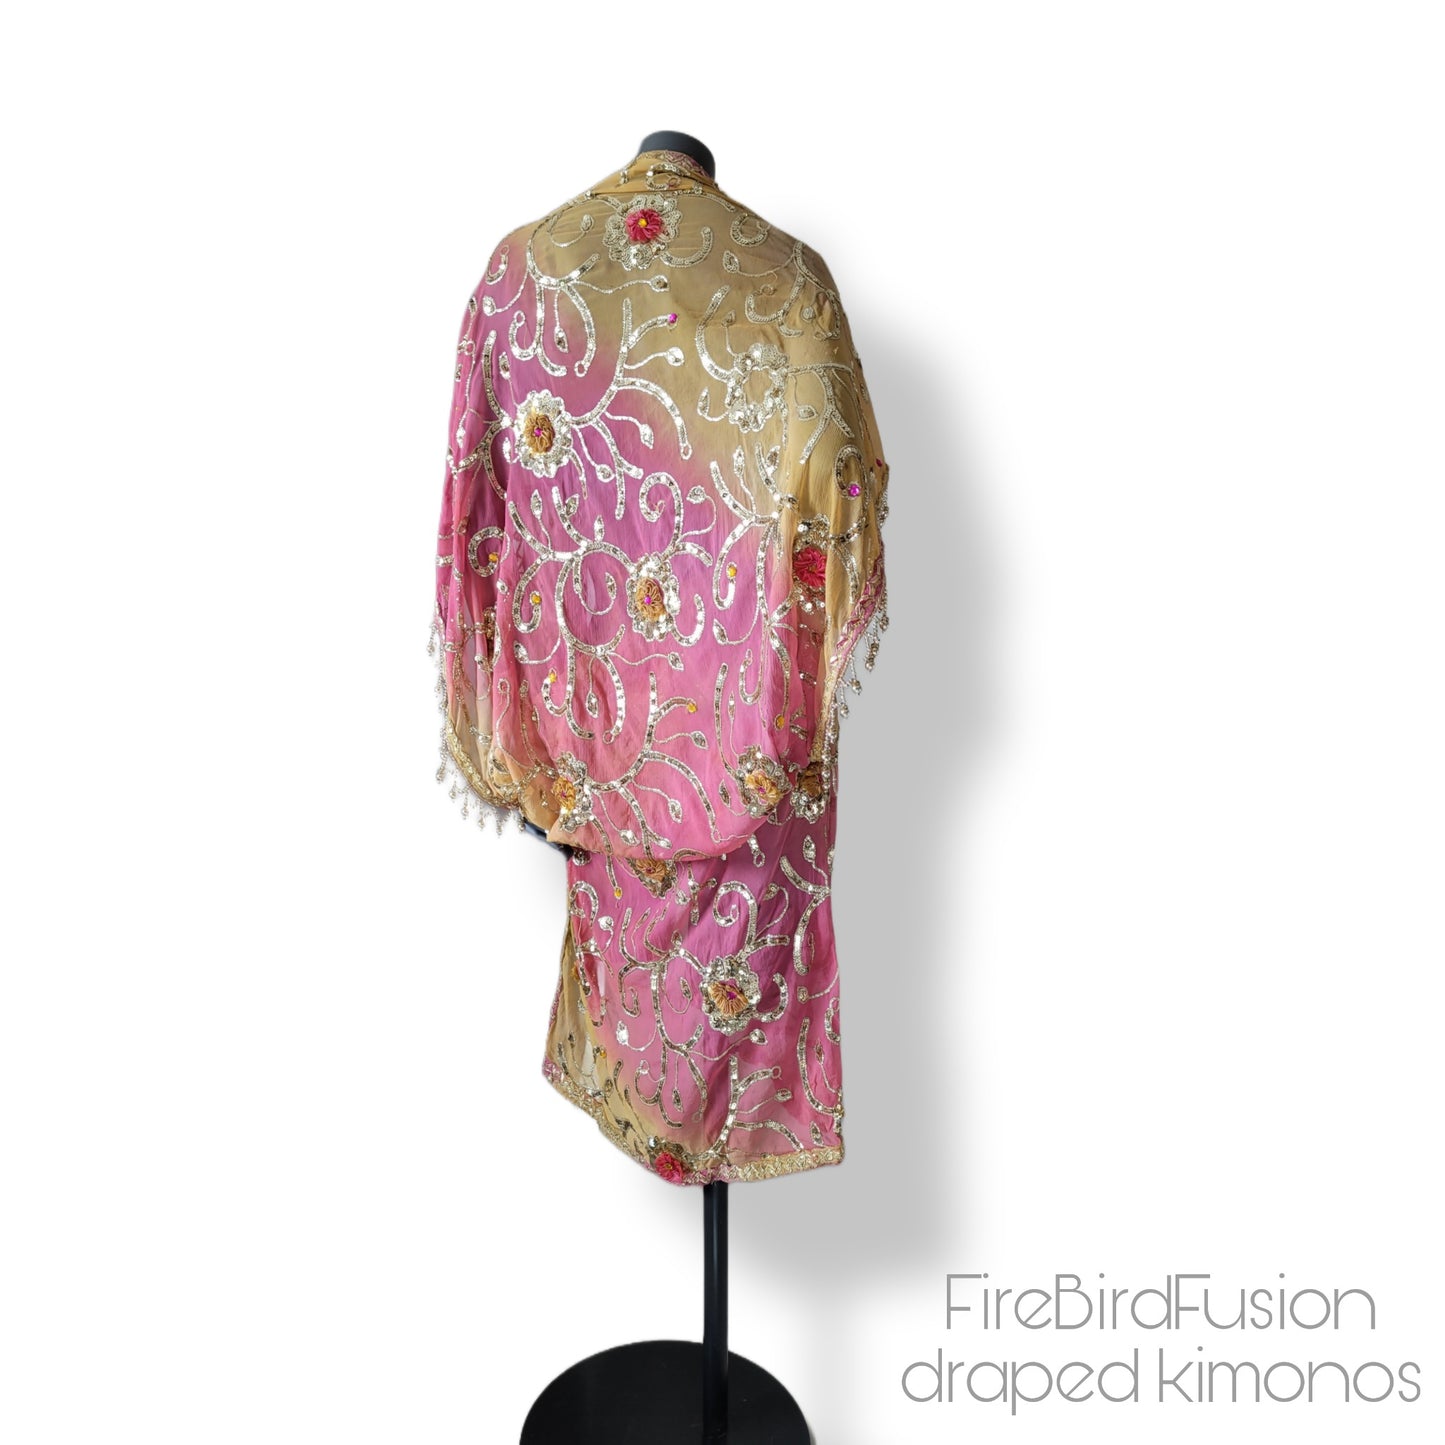 Draped kimono in yellow and pink with appliques, sequin embroidery and beaded trim (S)